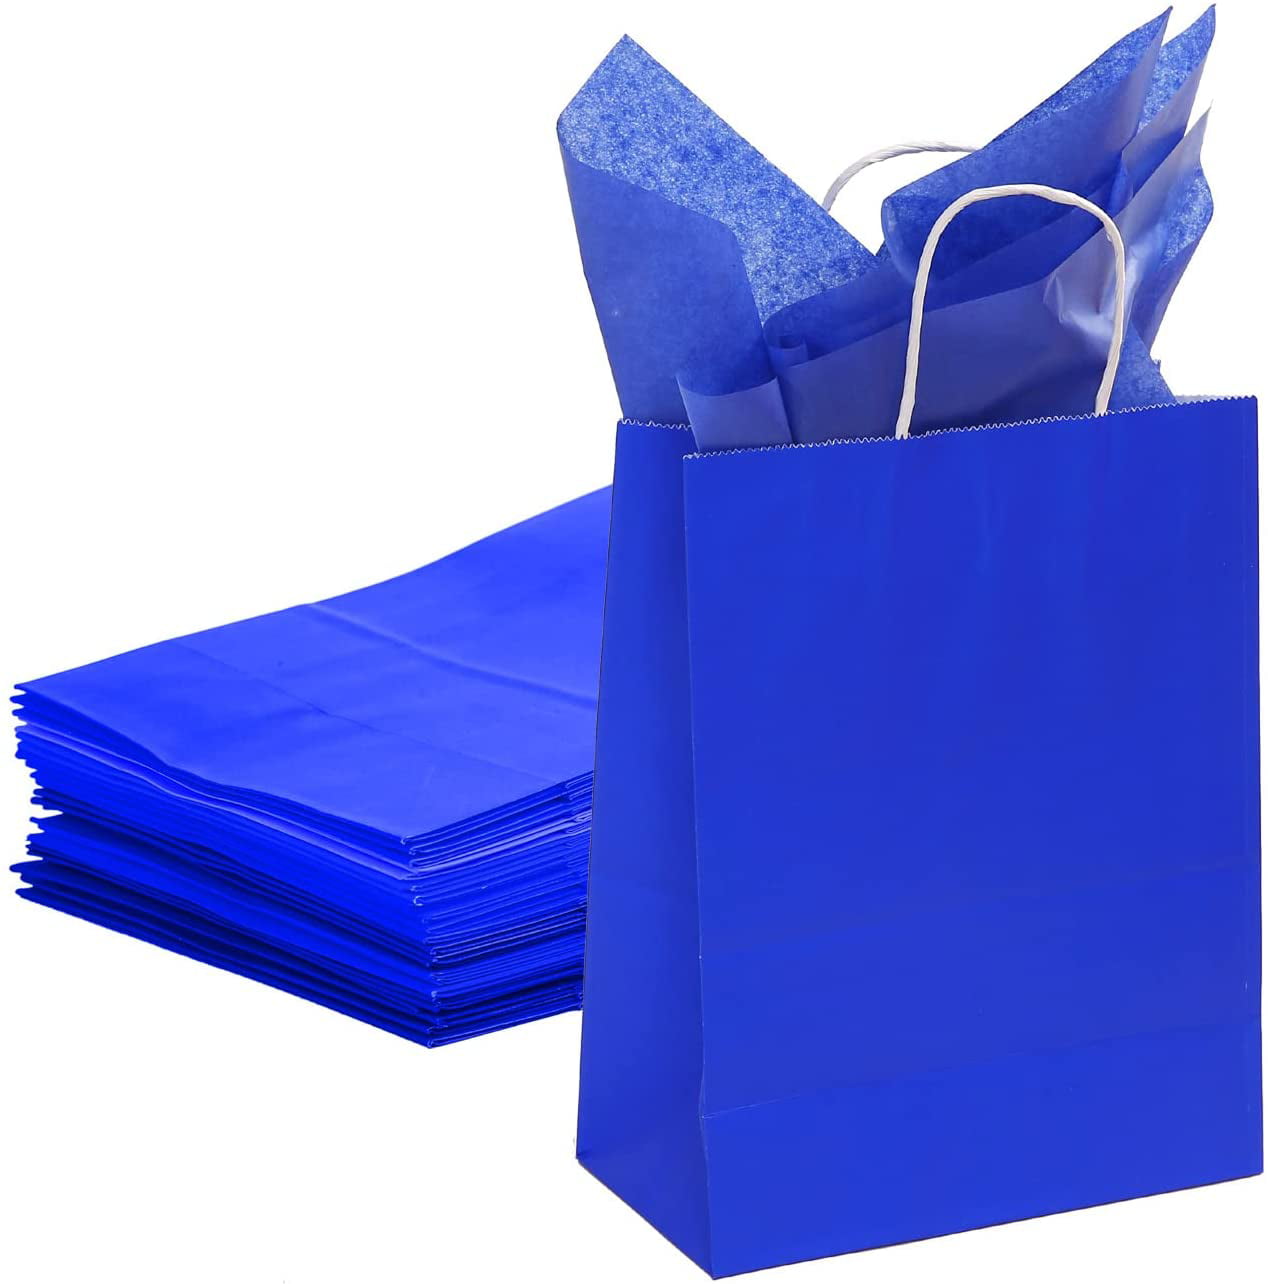  Kolaxen 24 Pcs Small Blue Gift Bags with Tissue Paper 8.6 * 6 *  3.15 inches, Premium Kraft Paper Bags with Handles for Goodie Bags, Party  Favor, Holiday, Shopping : Health & Household